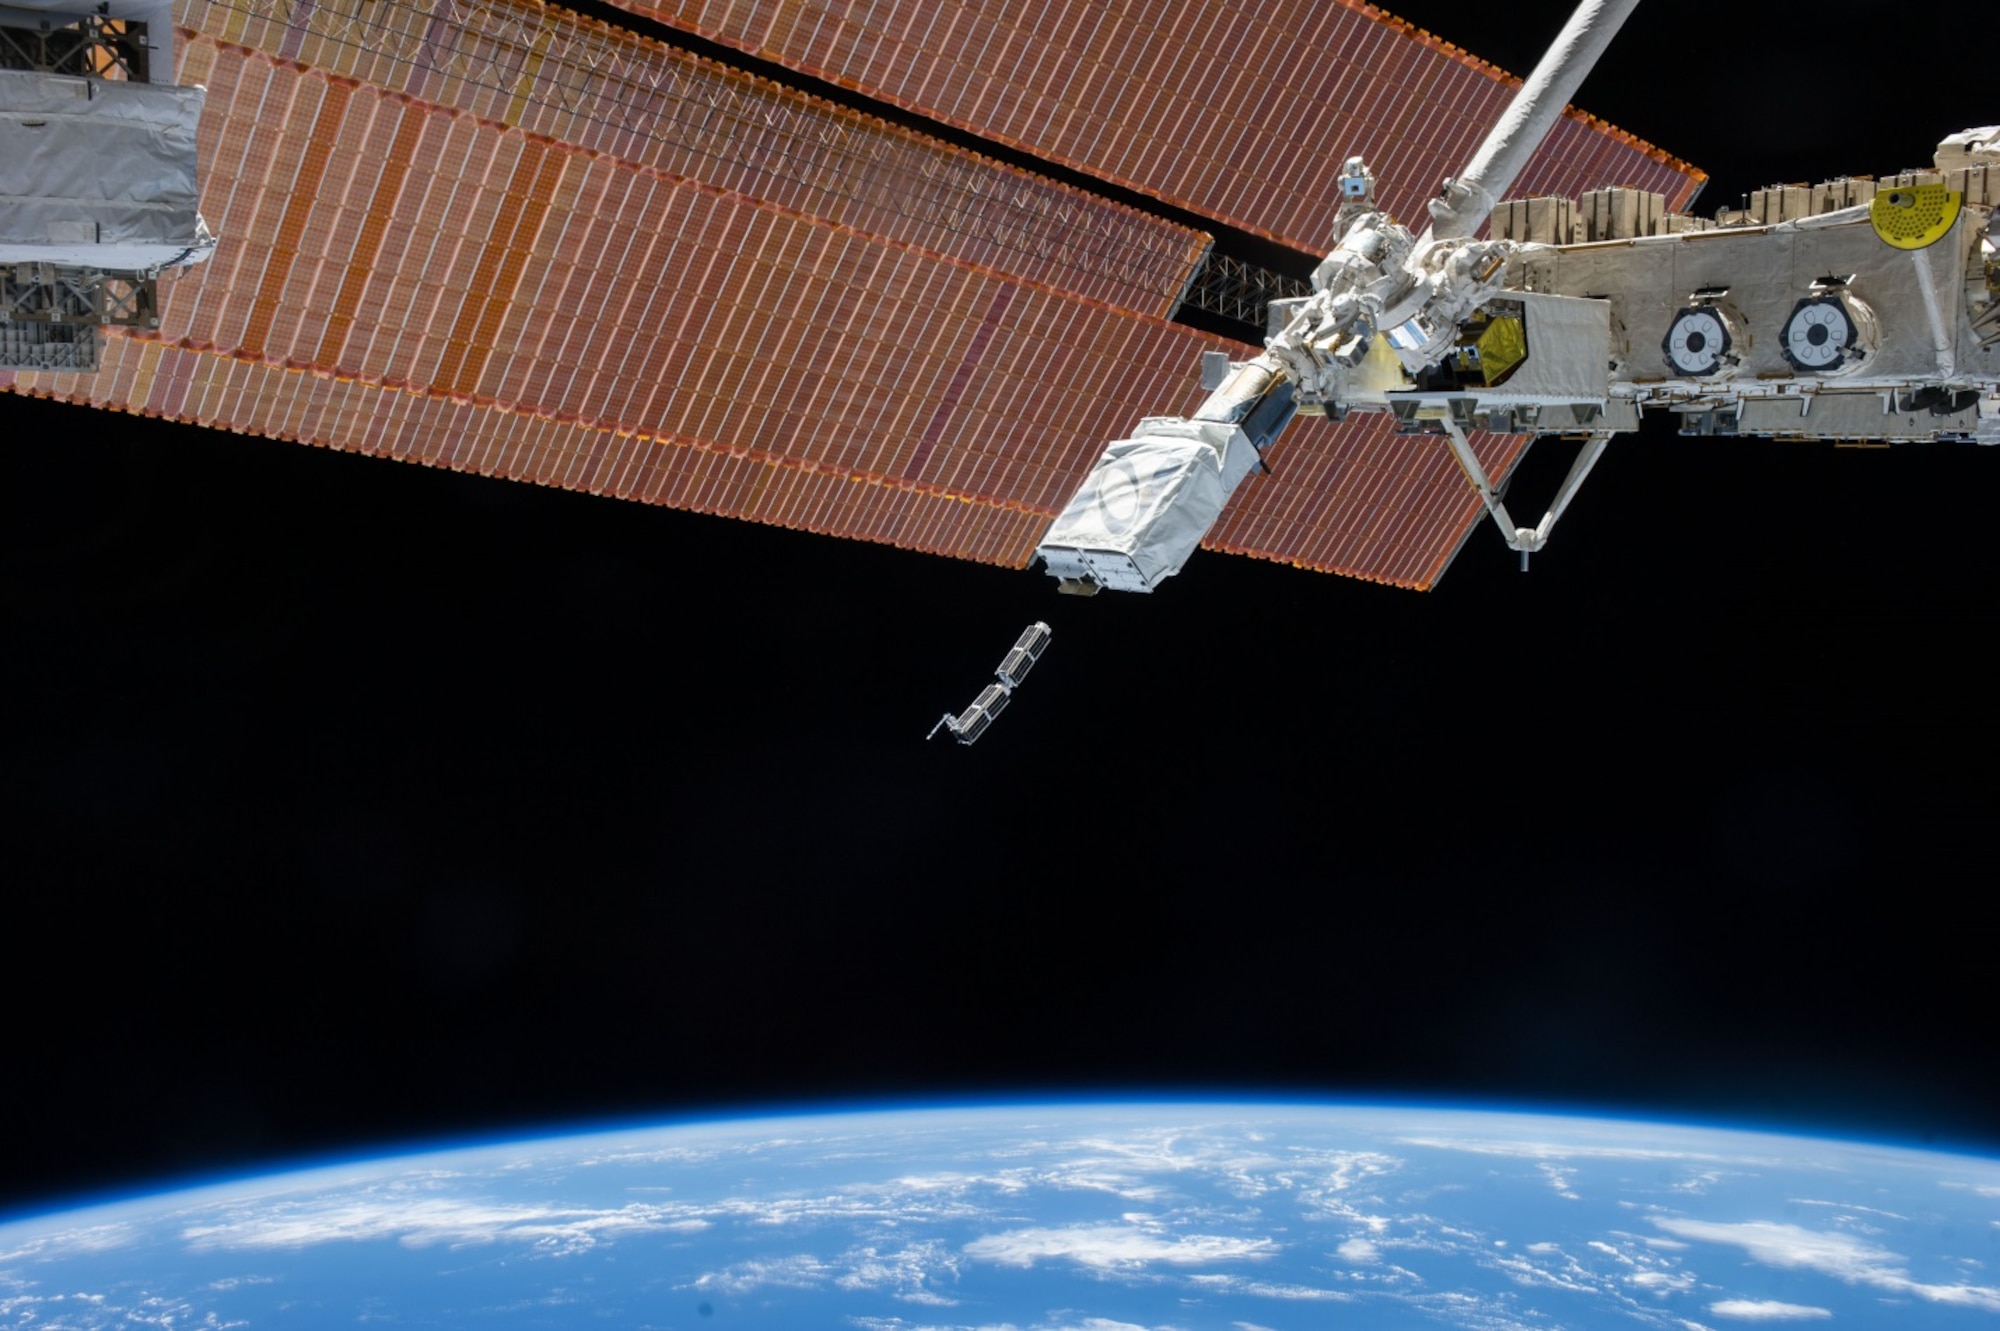 Miniature satellites, called CubeSats, are deployed from a much larger satellite. (NASA photo)